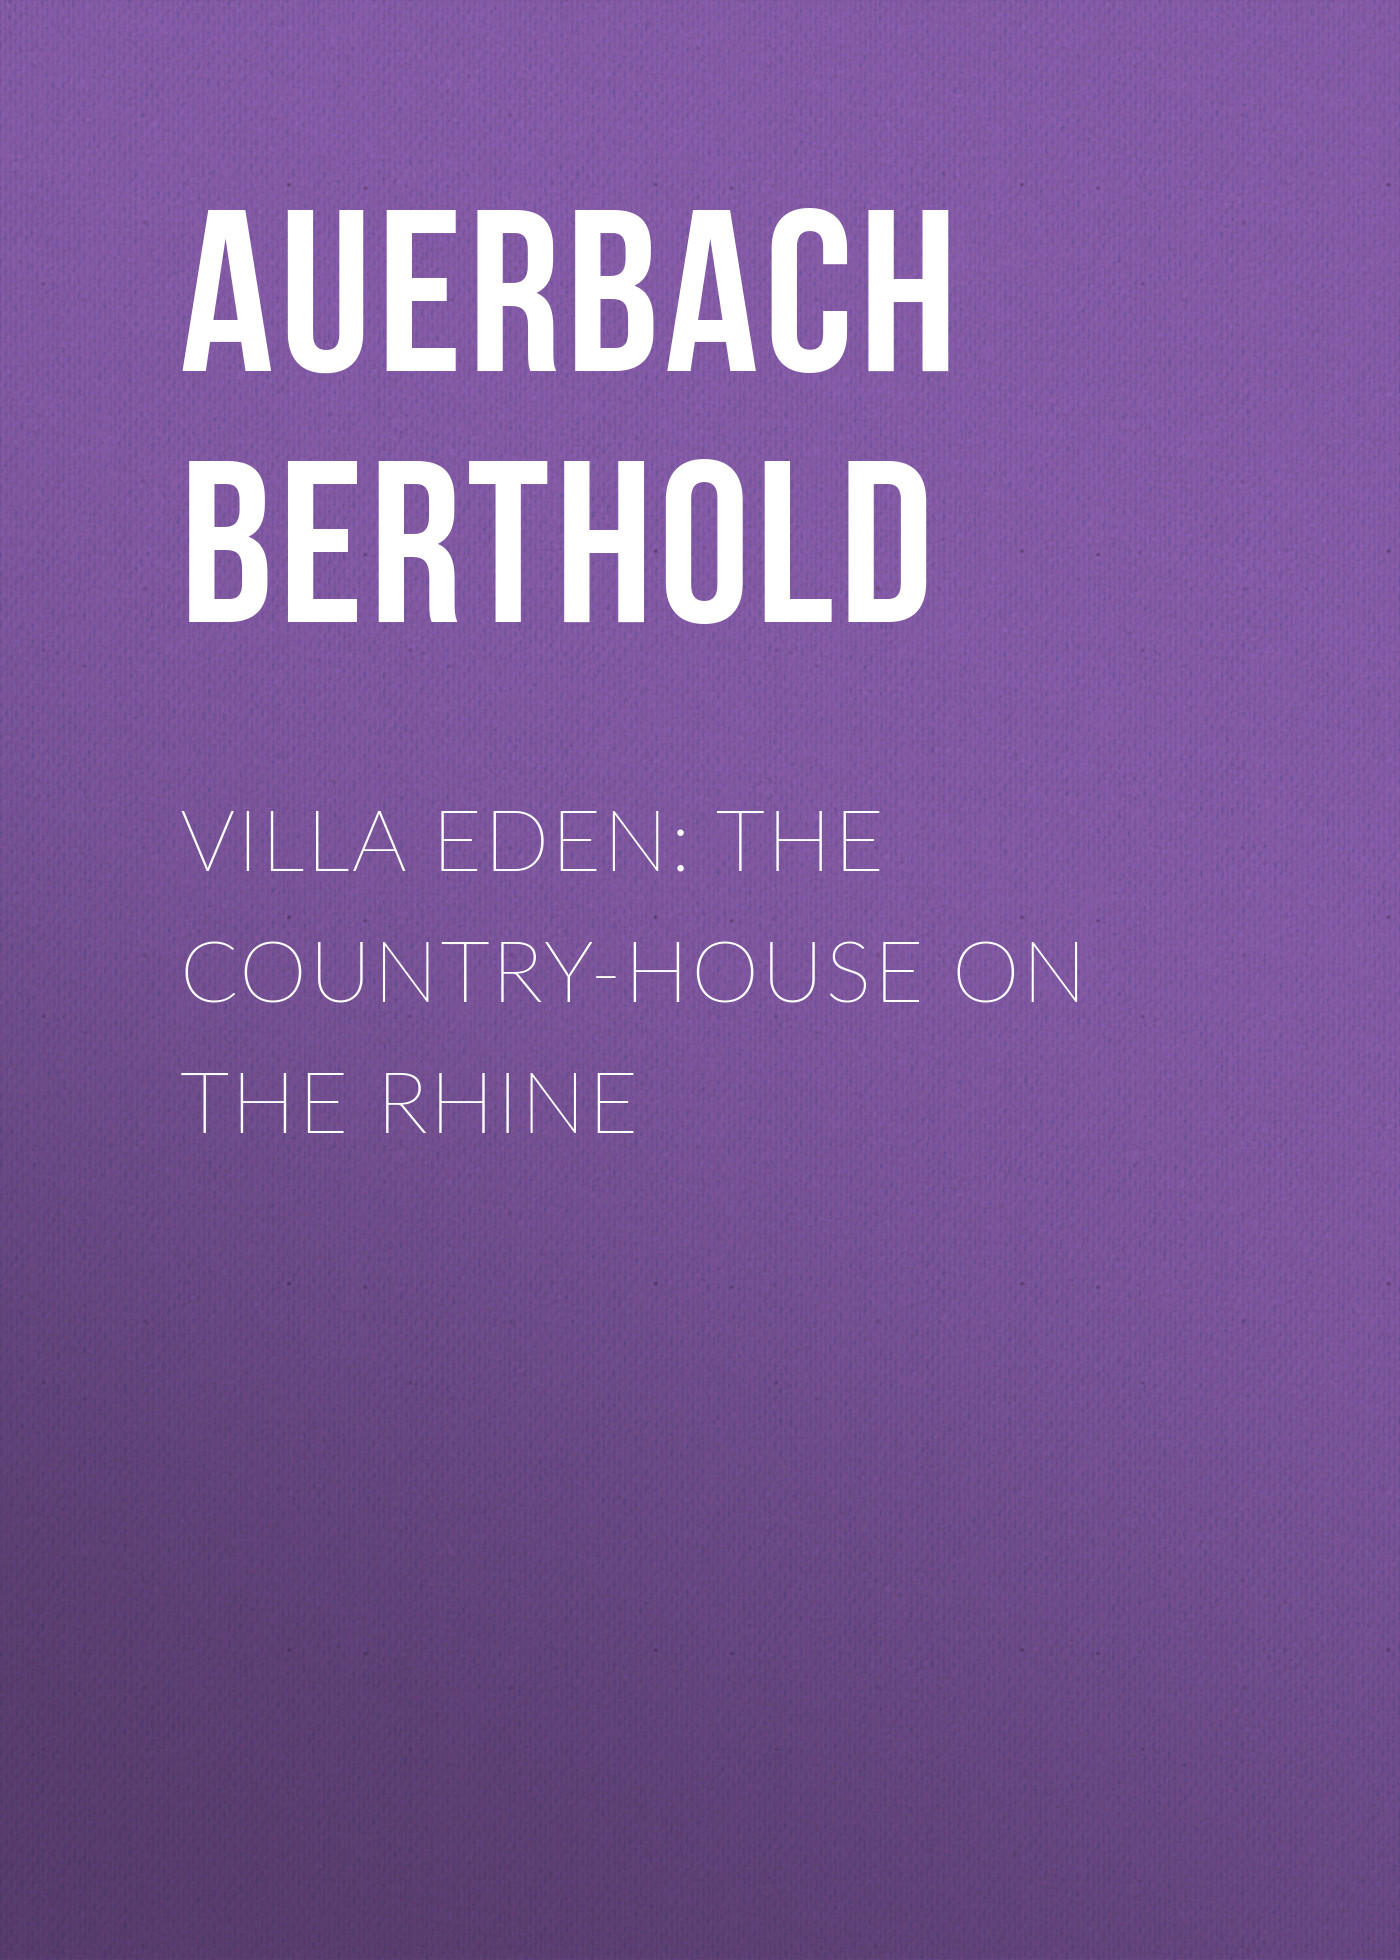 Villa Eden: The Country-House on the Rhine